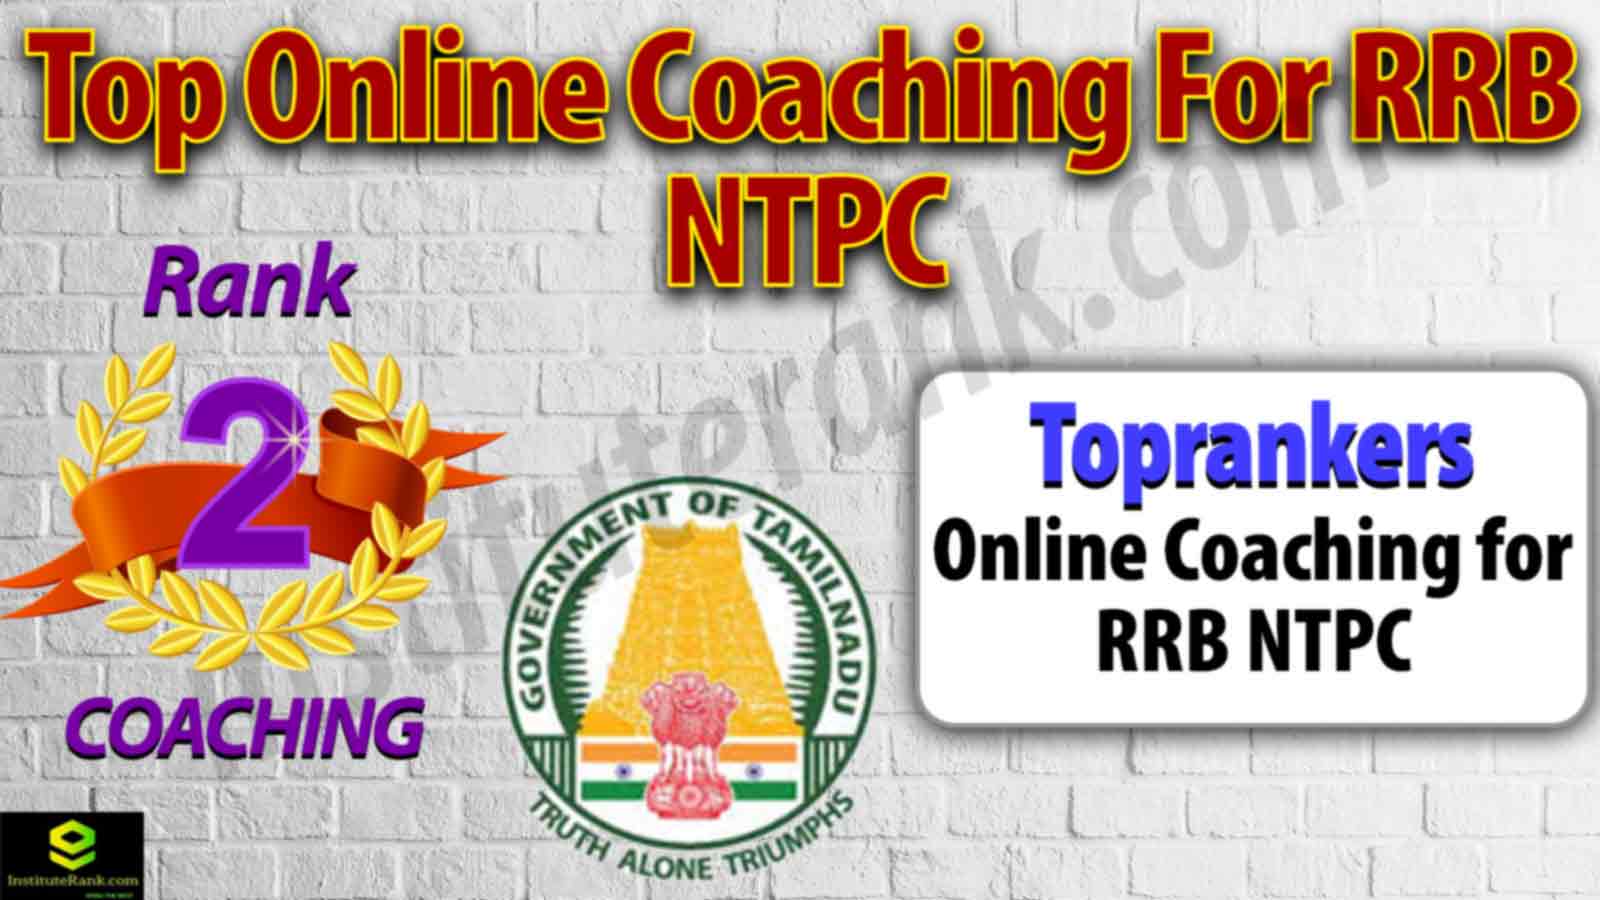 Best Online Coaching Preparation For Rrb NTPC Examination